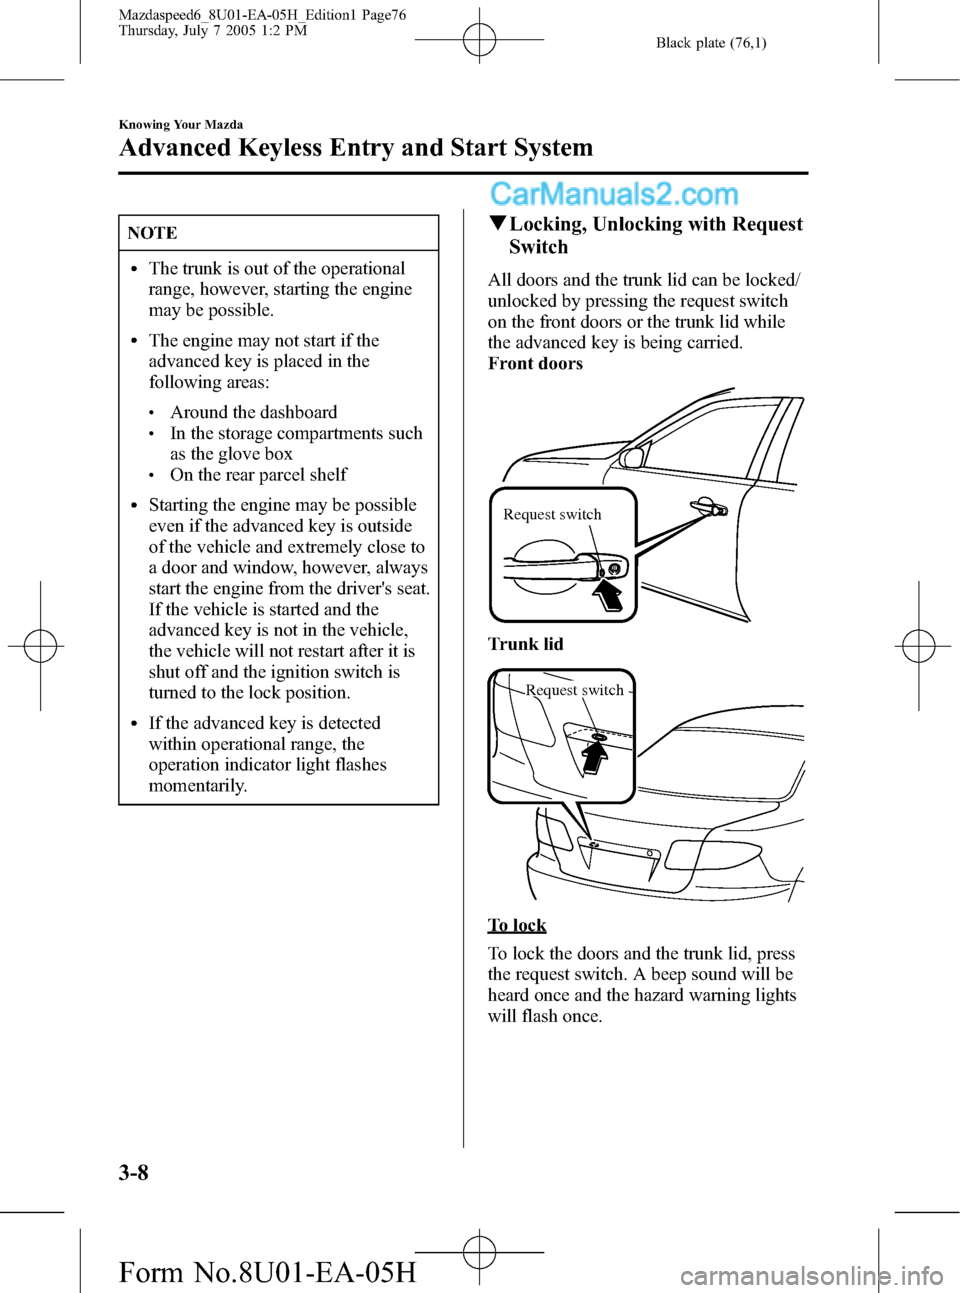 MAZDA MODEL MAZDASPEED 6 2006  Owners Manual (in English) Black plate (76,1)
NOTE
lThe trunk is out of the operational
range, however, starting the engine
may be possible.
lThe engine may not start if the
advanced key is placed in the
following areas:
lAroun